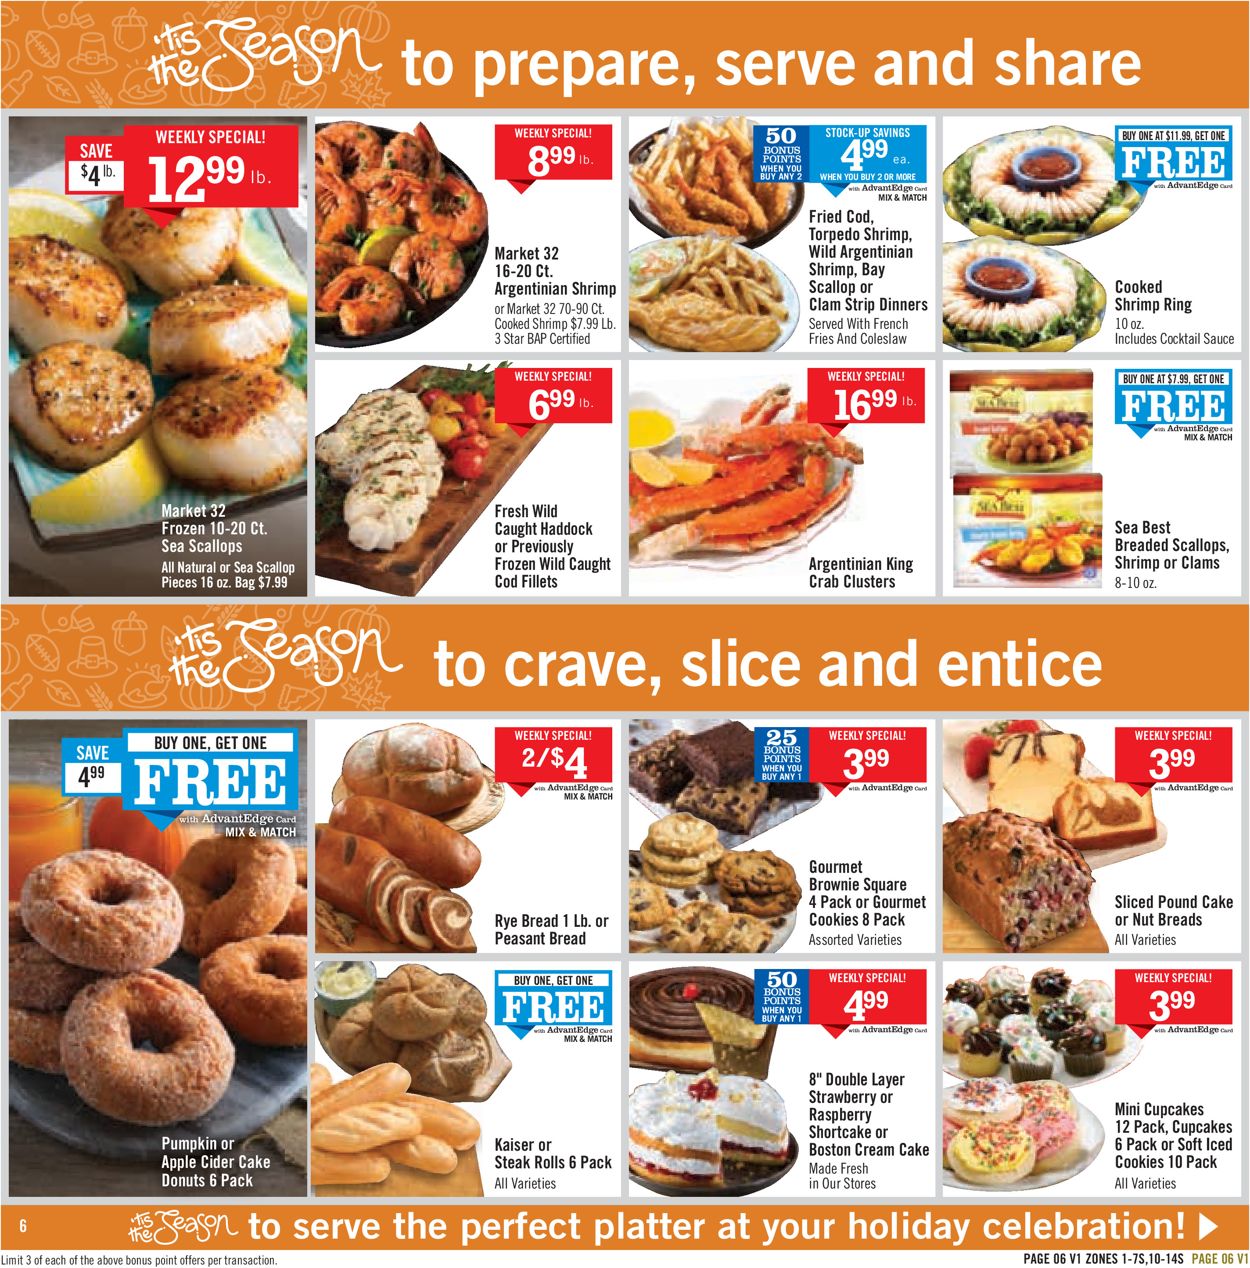 Price Chopper Current weekly ad 11/10 11/16/2019 10 frequent ads com